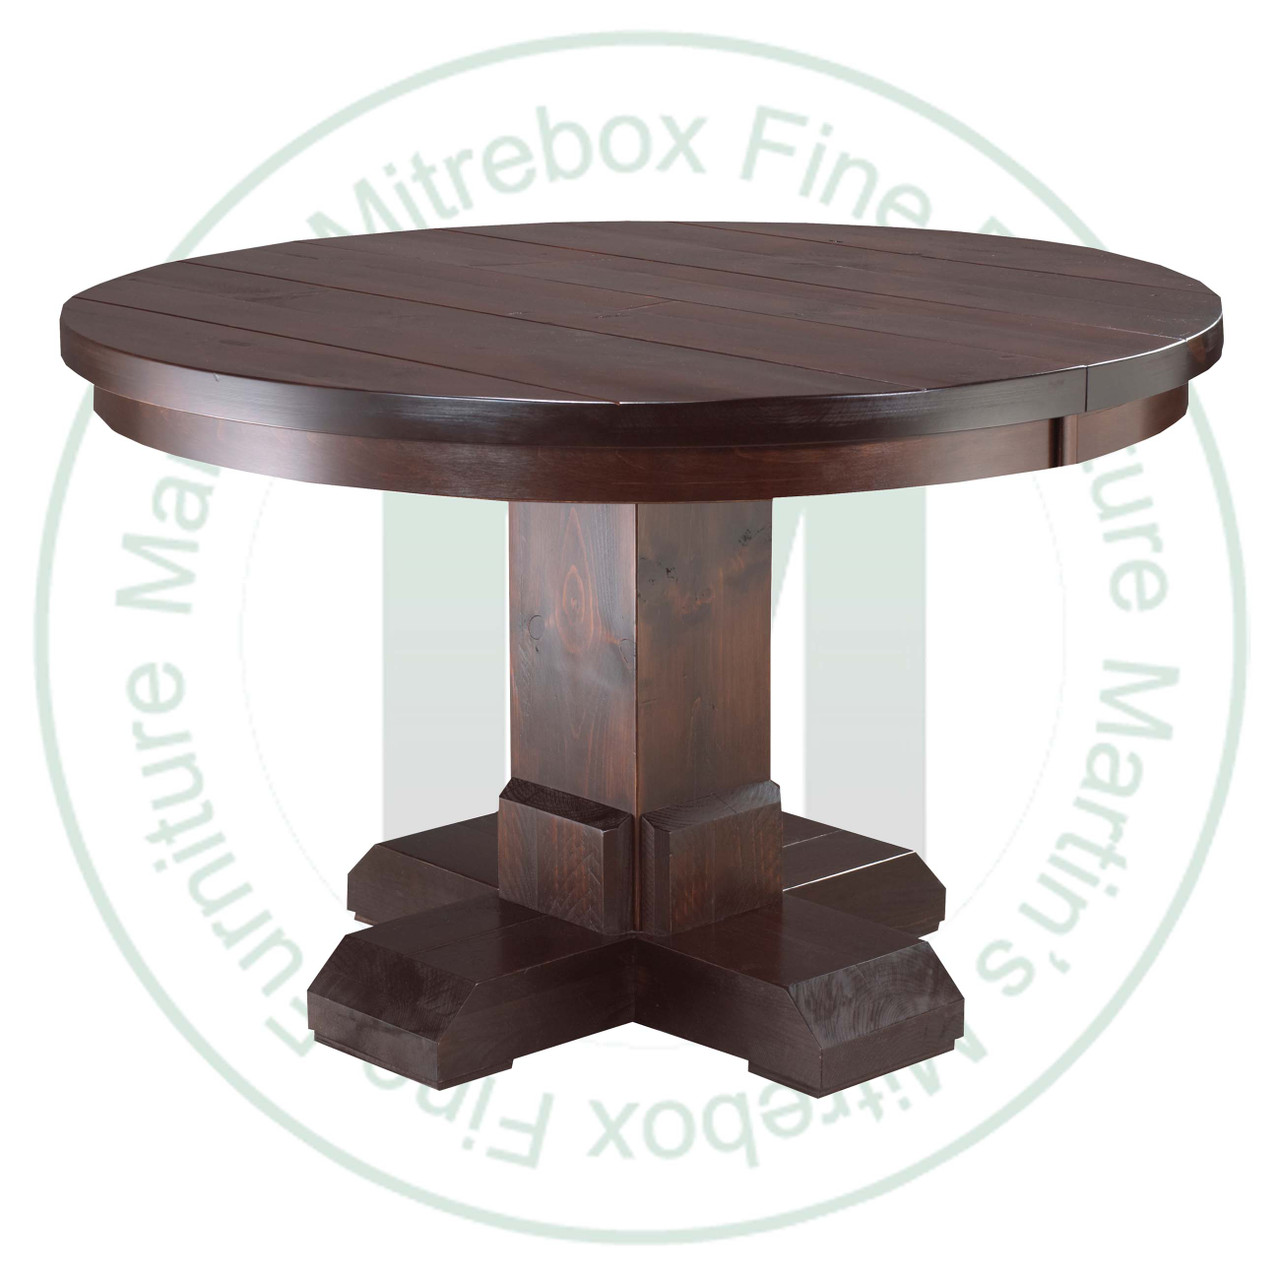 Maple Shrewsbury Single Pedestal Table 54''D x 54''W x 30''H With 1 - 12'' Leaf Table. Table Has 1.25'' Thick Top.